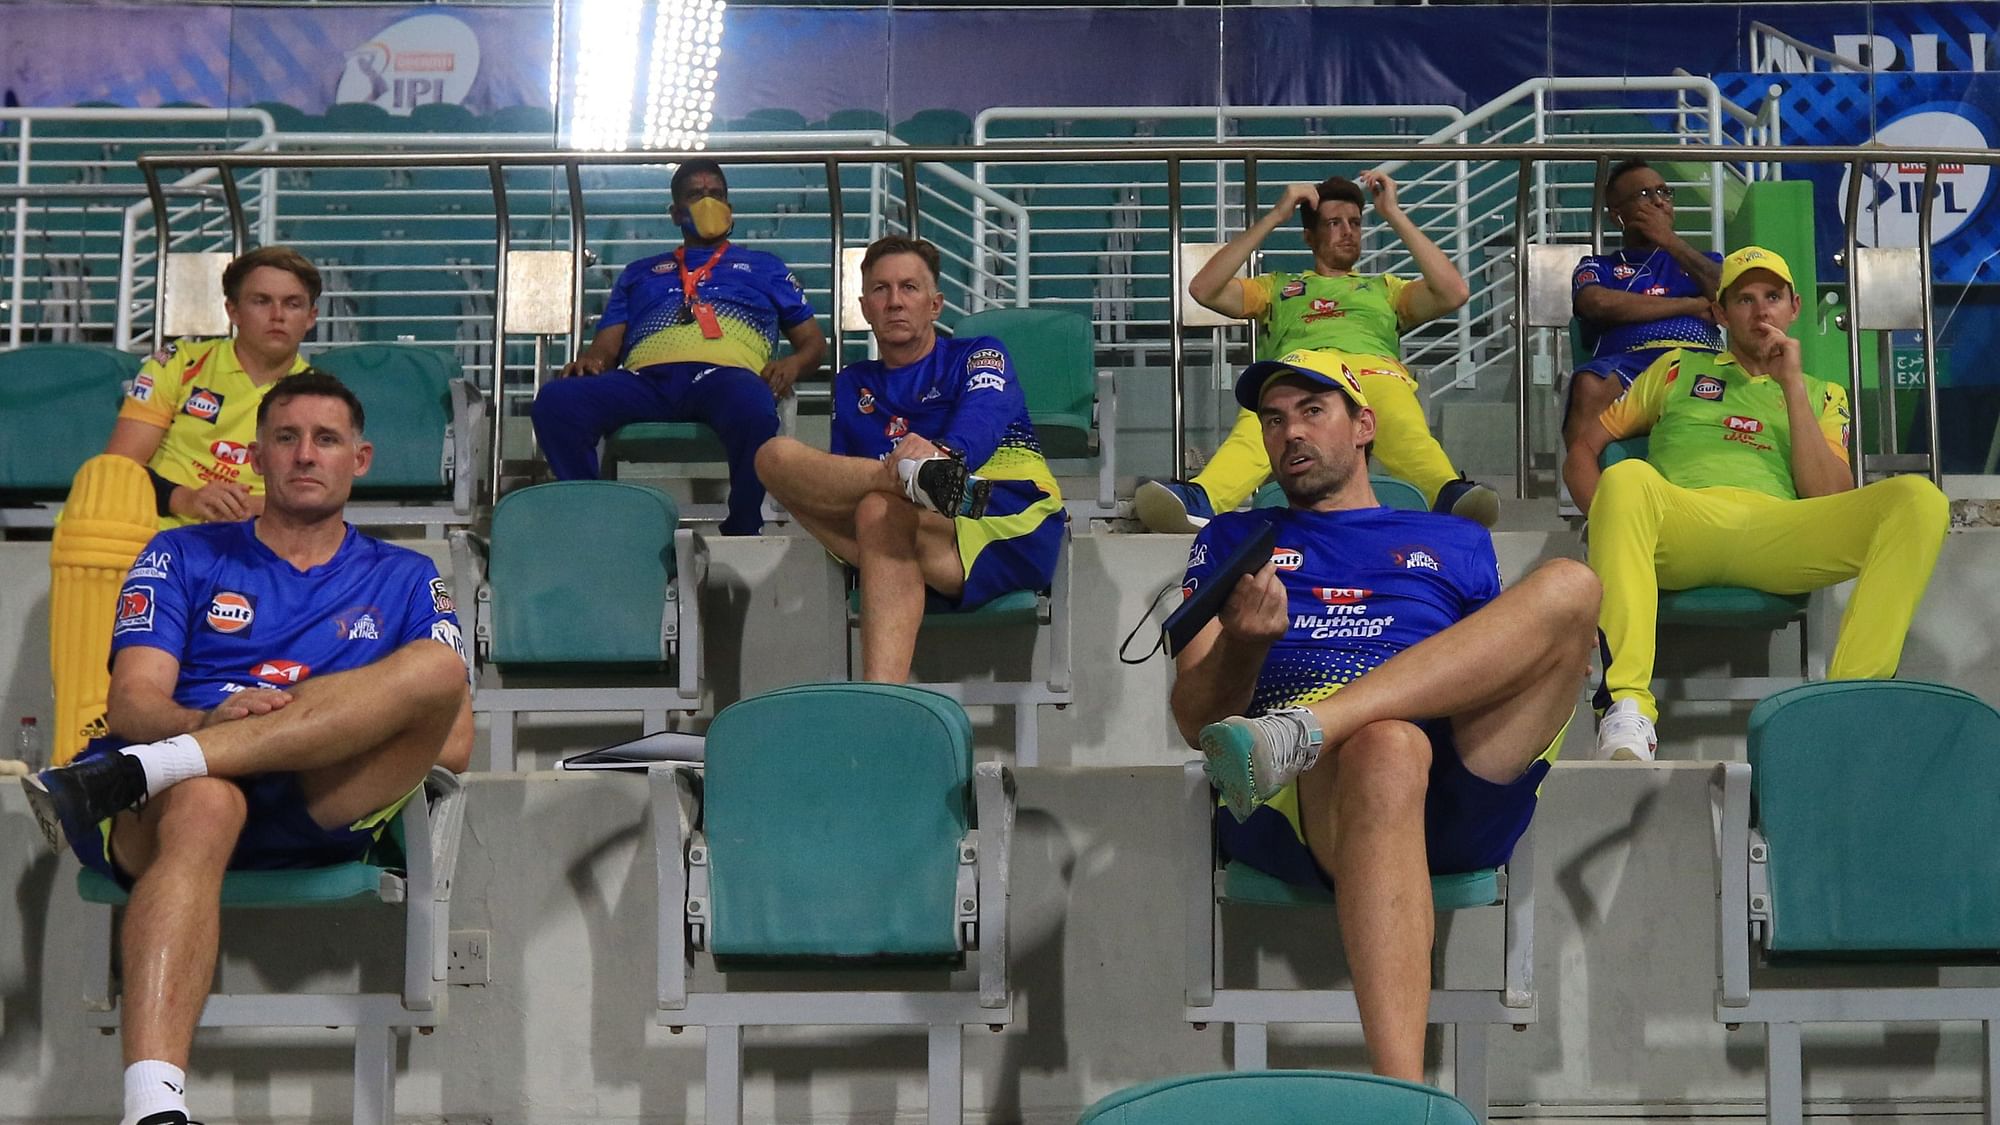 MS Dhoni CSK’s support staff and players sit in the stands, maintaining social distancing, as they watch the game against Mumbai Indians.